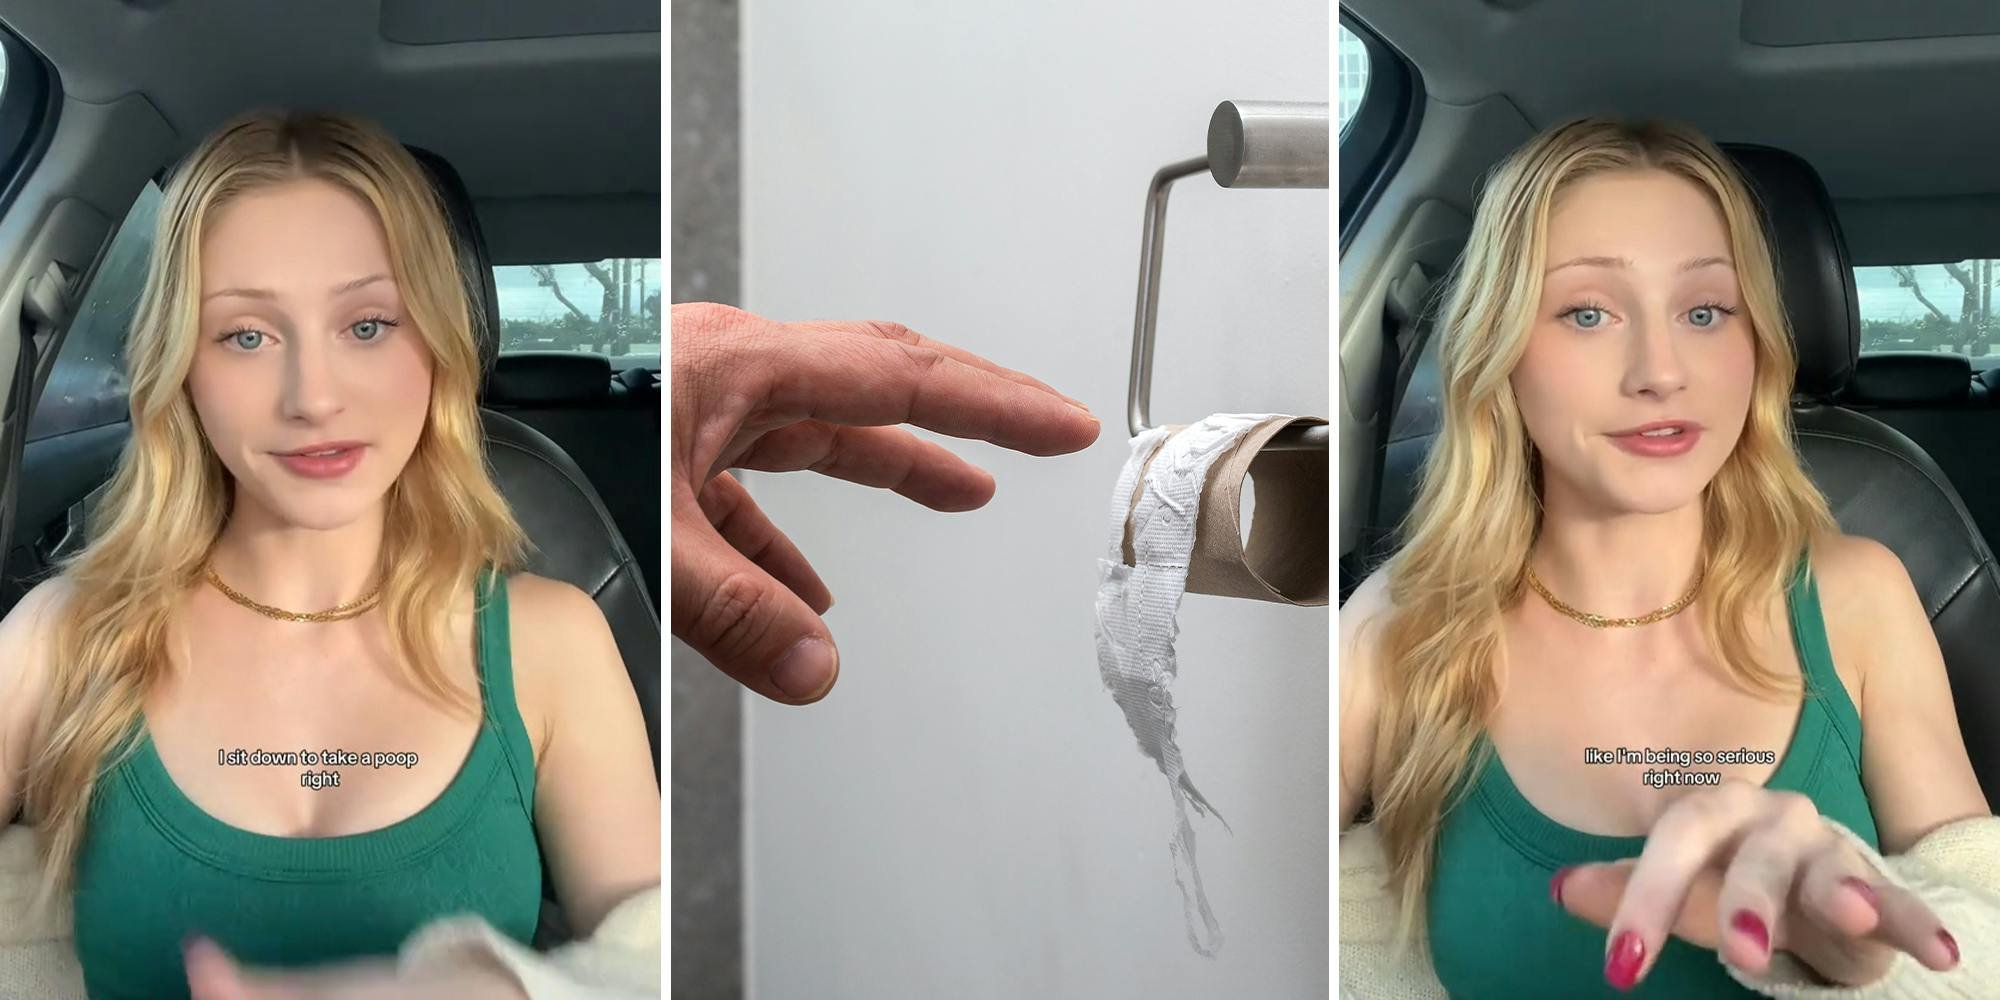 'I will never get over this': Woman breaks up with her boyfriend over toilet paper argument. Should she have?